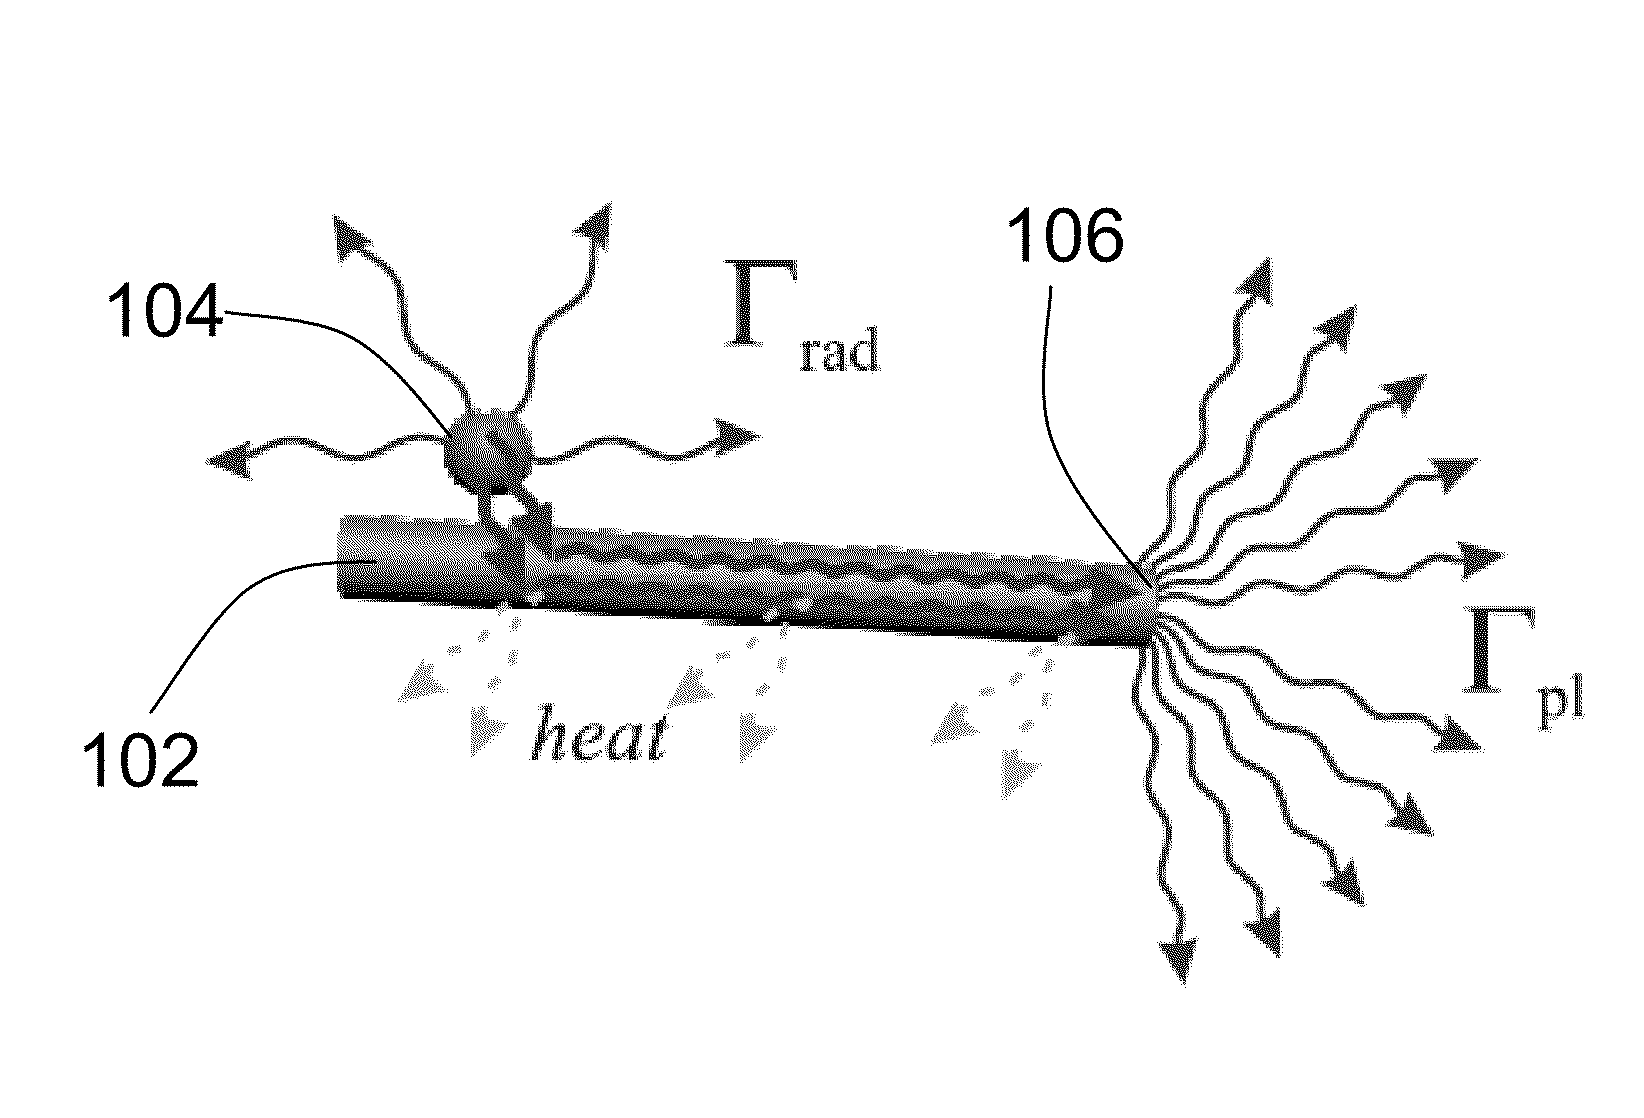 Method Of Efficient Coupling Of Light From Single-Photon Emitter To Guided Radiation Localized To Sub-Wavelength Dimensions On Conducting Nanowires